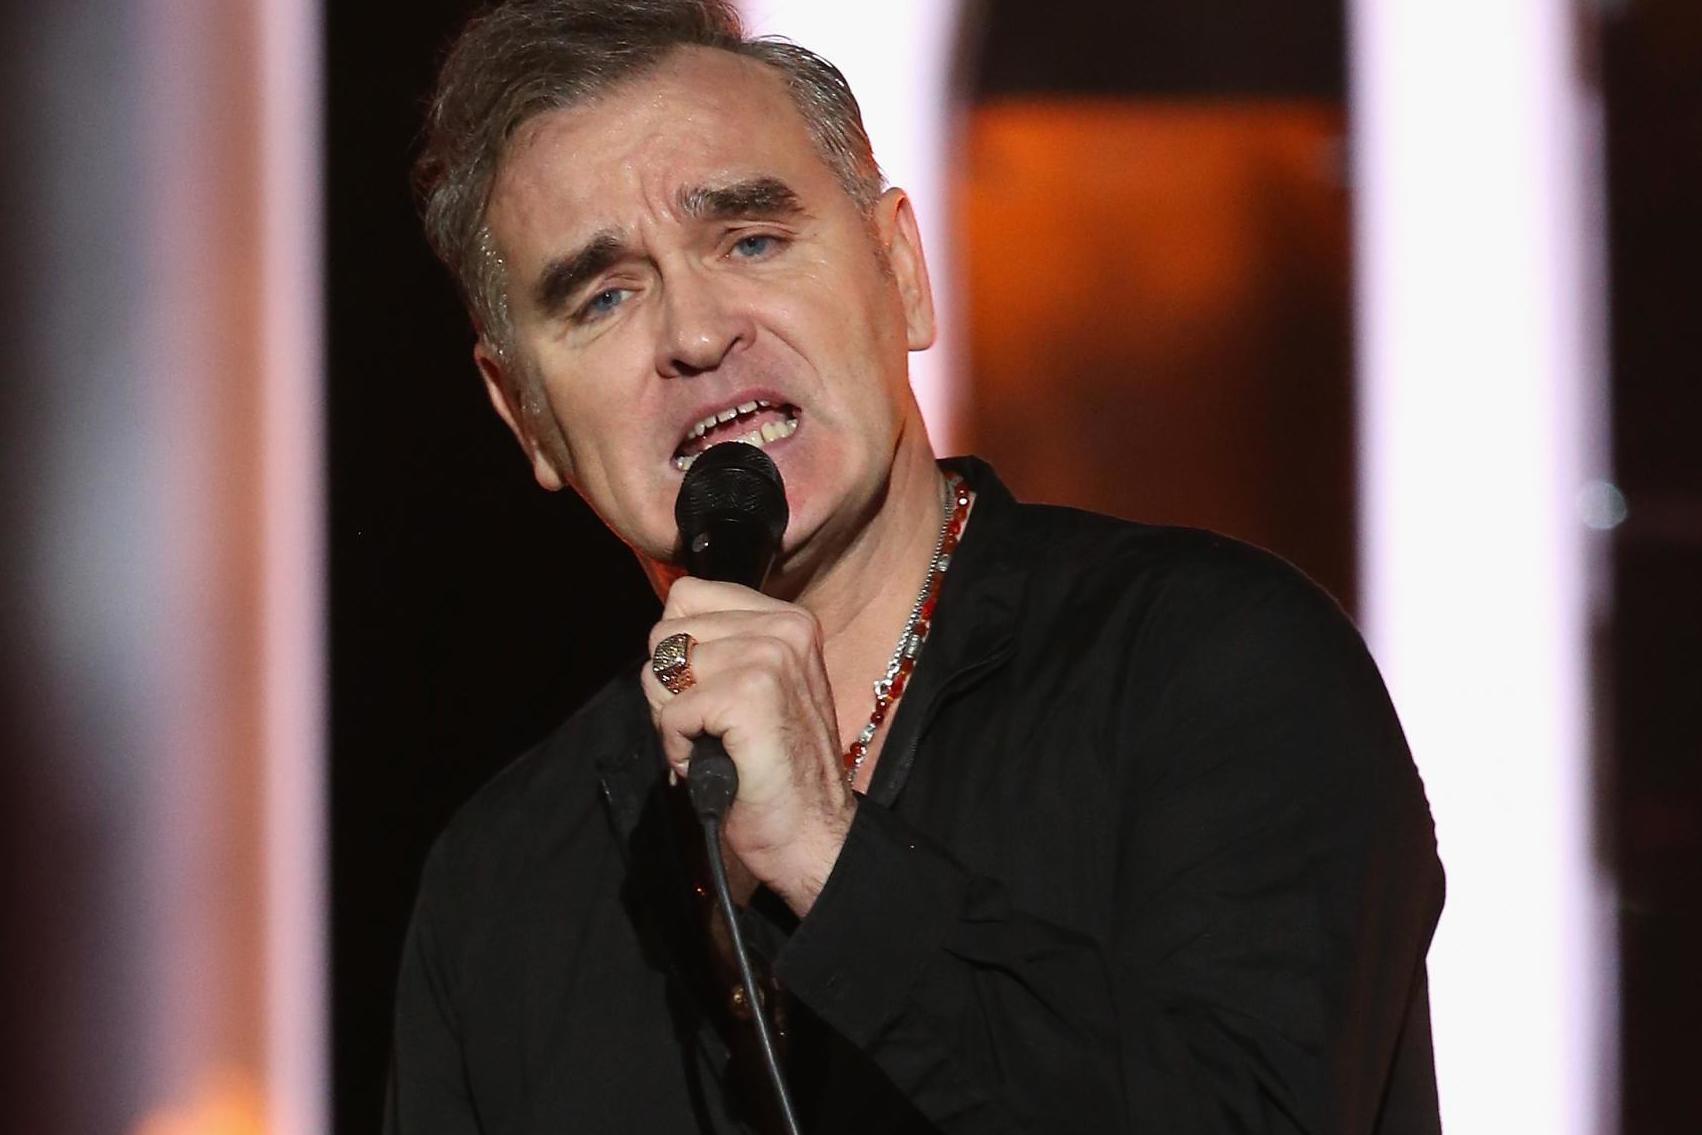 Morrissey performs during the 20th annual Nobel Peace Prize Concert press conference on 11 December at the Oslo Spektrum arena in Oslo, Norway.